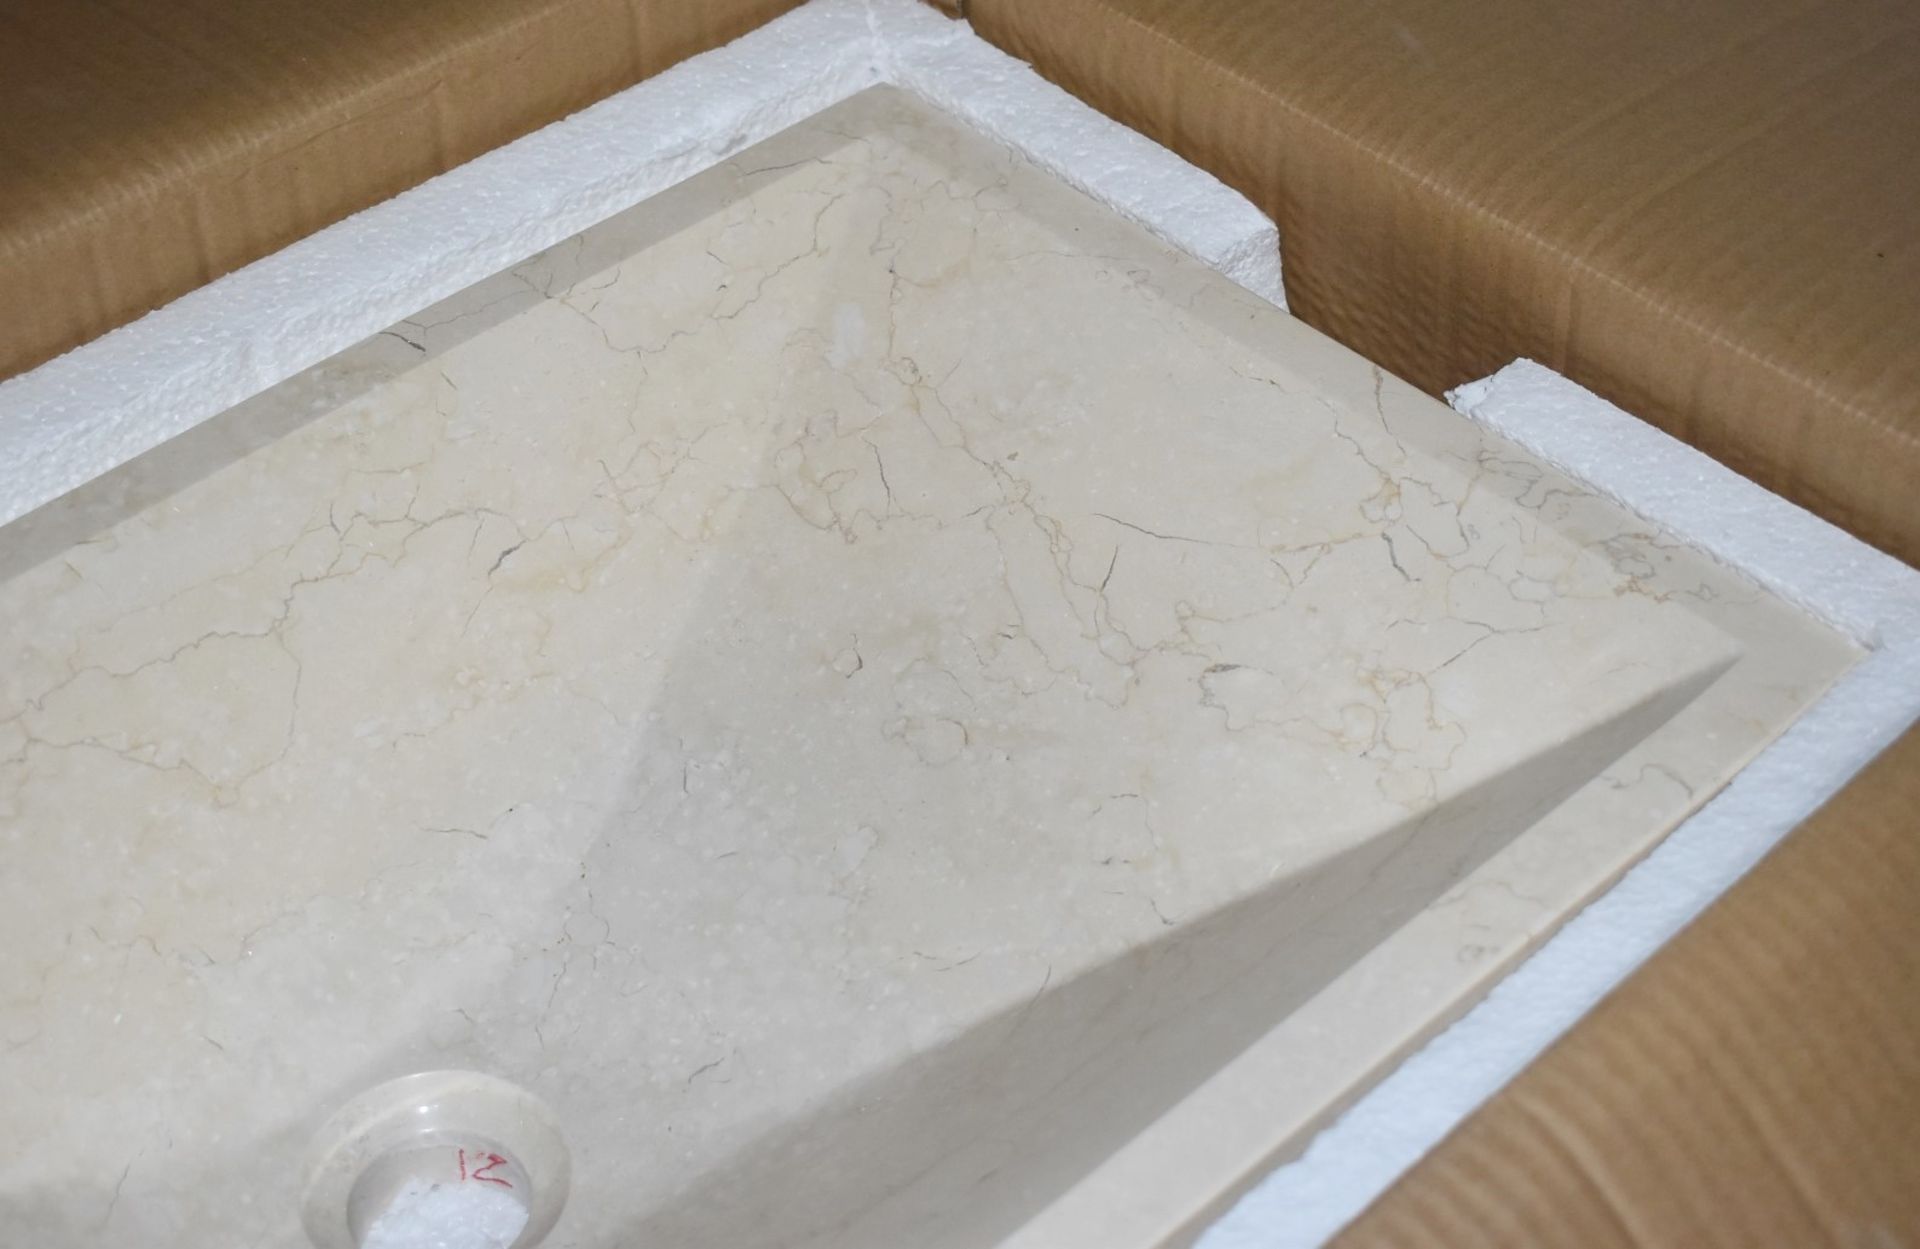 1 x Stonearth 'Karo' Solid Travertine Stone Countertop Sink Basin - New Boxed Stock - RRP £525 - - Image 4 of 8